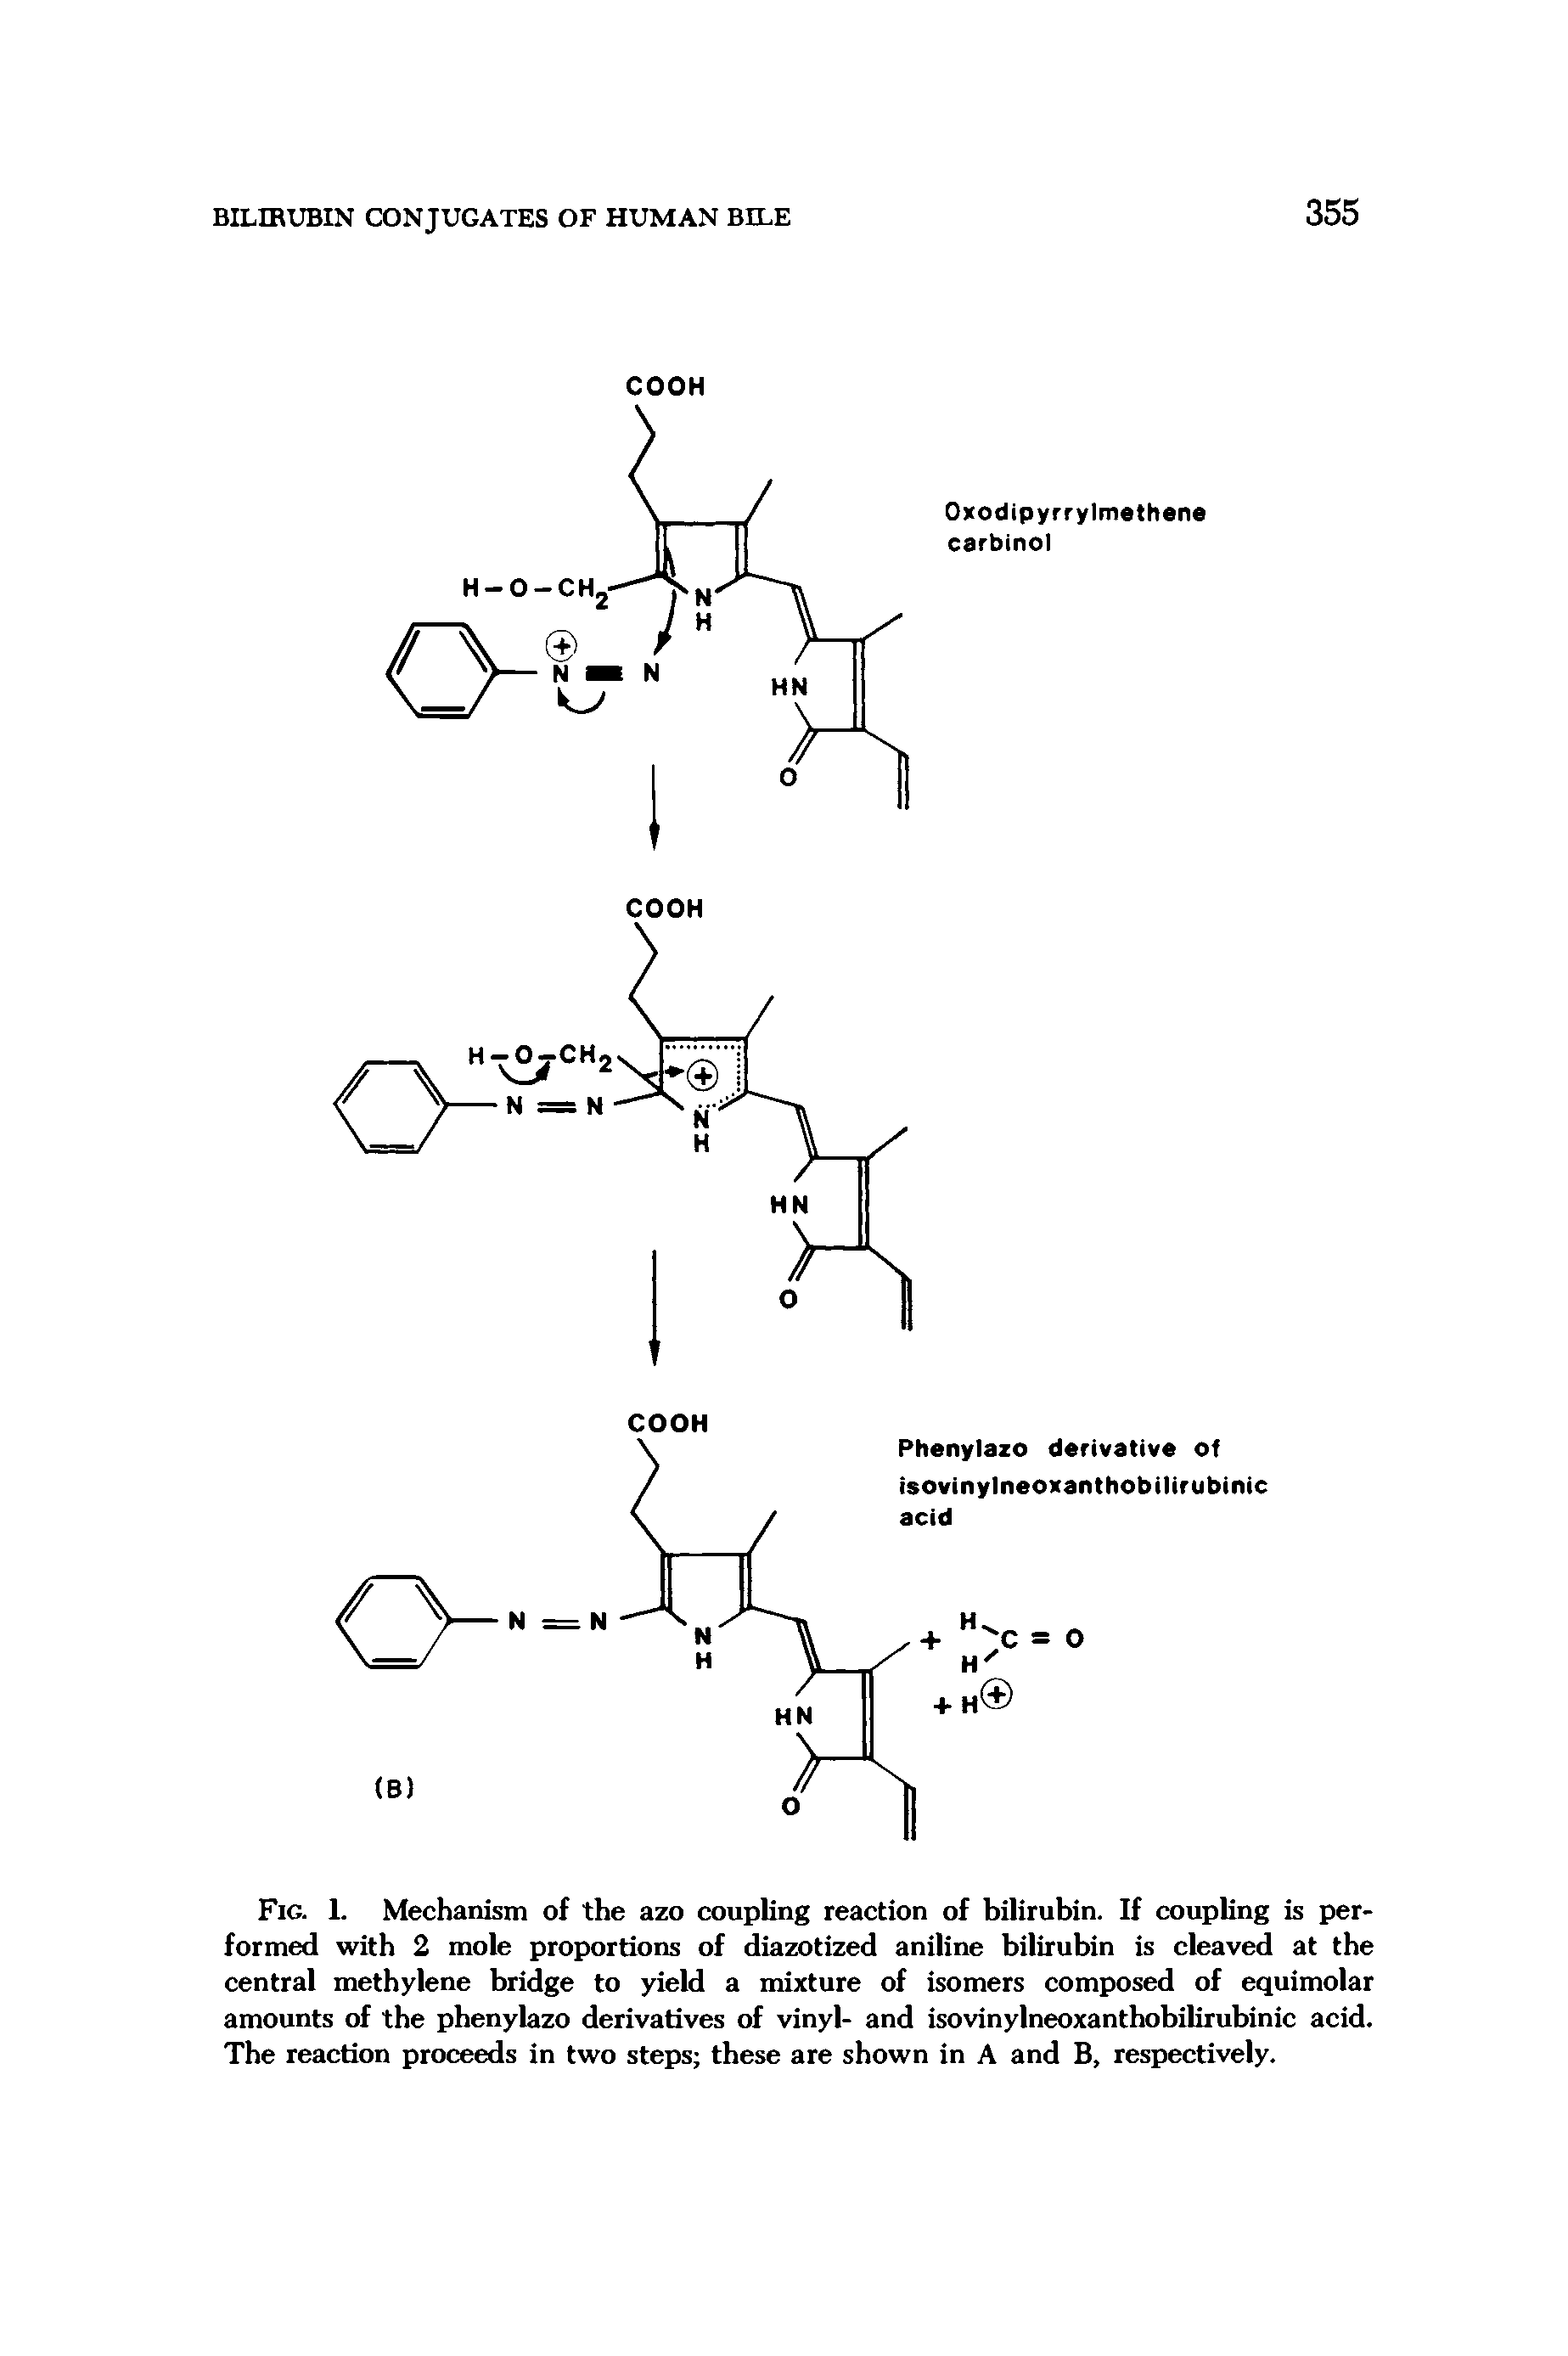 Fig. L Mechanism of the azo coupling reaction of bilirubin. If coupling is performed with 2 mole proportions of diazotized aniline bilirubin is cleaved at the central methylene bridge to yield a mixture of isomers composed of equimolar amounts of the phenylazo derivatives of vinyl- and isovinyineoxanthobilirubinic acid. The reaction proceeds in two steps these are shown in A and B, respectively.